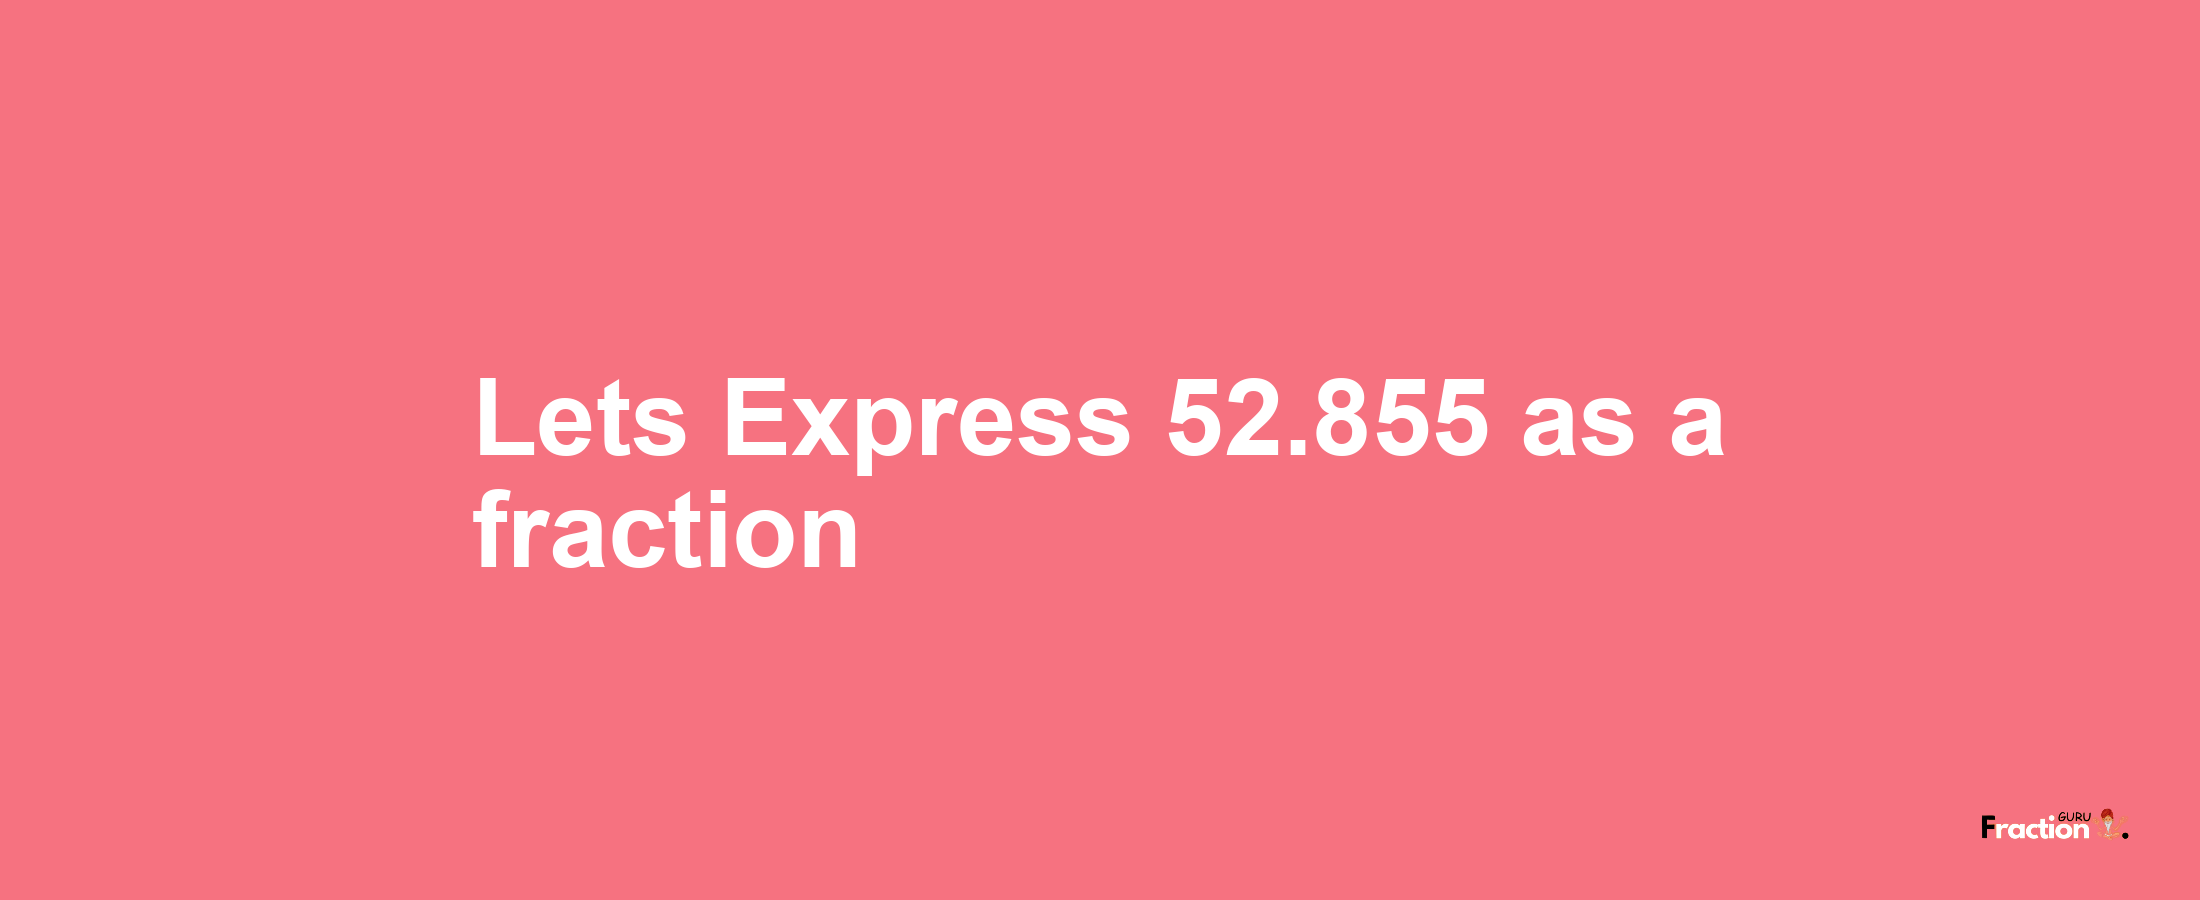 Lets Express 52.855 as afraction